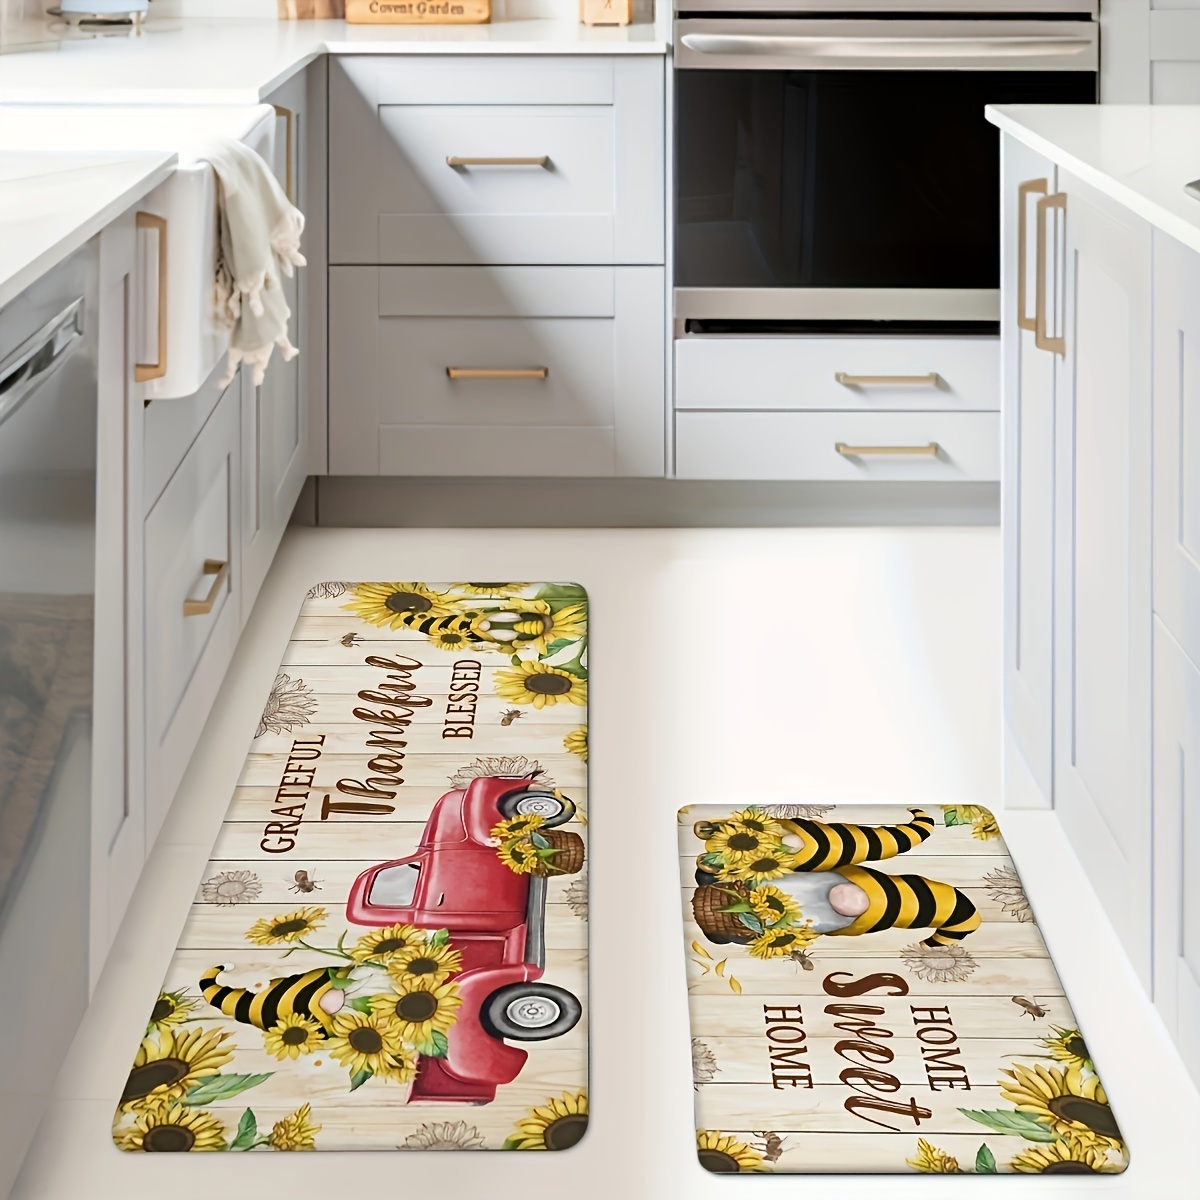 

3pcs/set Bee Pattern Floor Rug, Non-slip Absorbent Carpet, Three-piece Bathroom Mat Set, Thick Carpets For Kitchen, Home, Office, Sink, Laundry Room, Bathroom, Home Room Decor, Spring Summer Decor